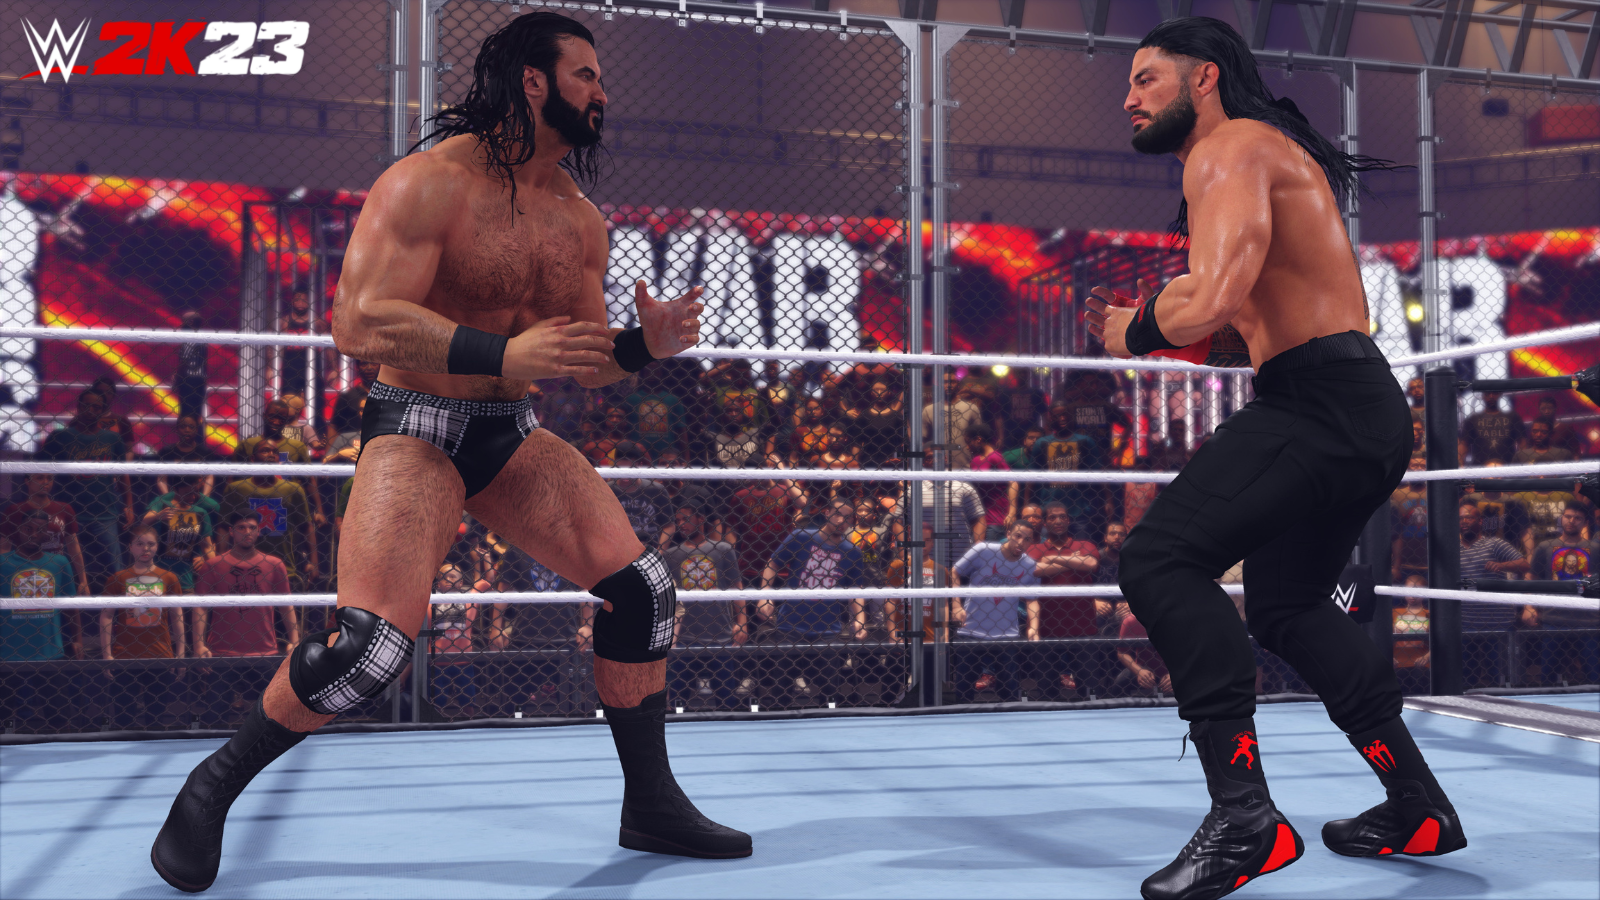 Drew McIntyre and Roman Reigns fight within WarGames in WWE 2K23.